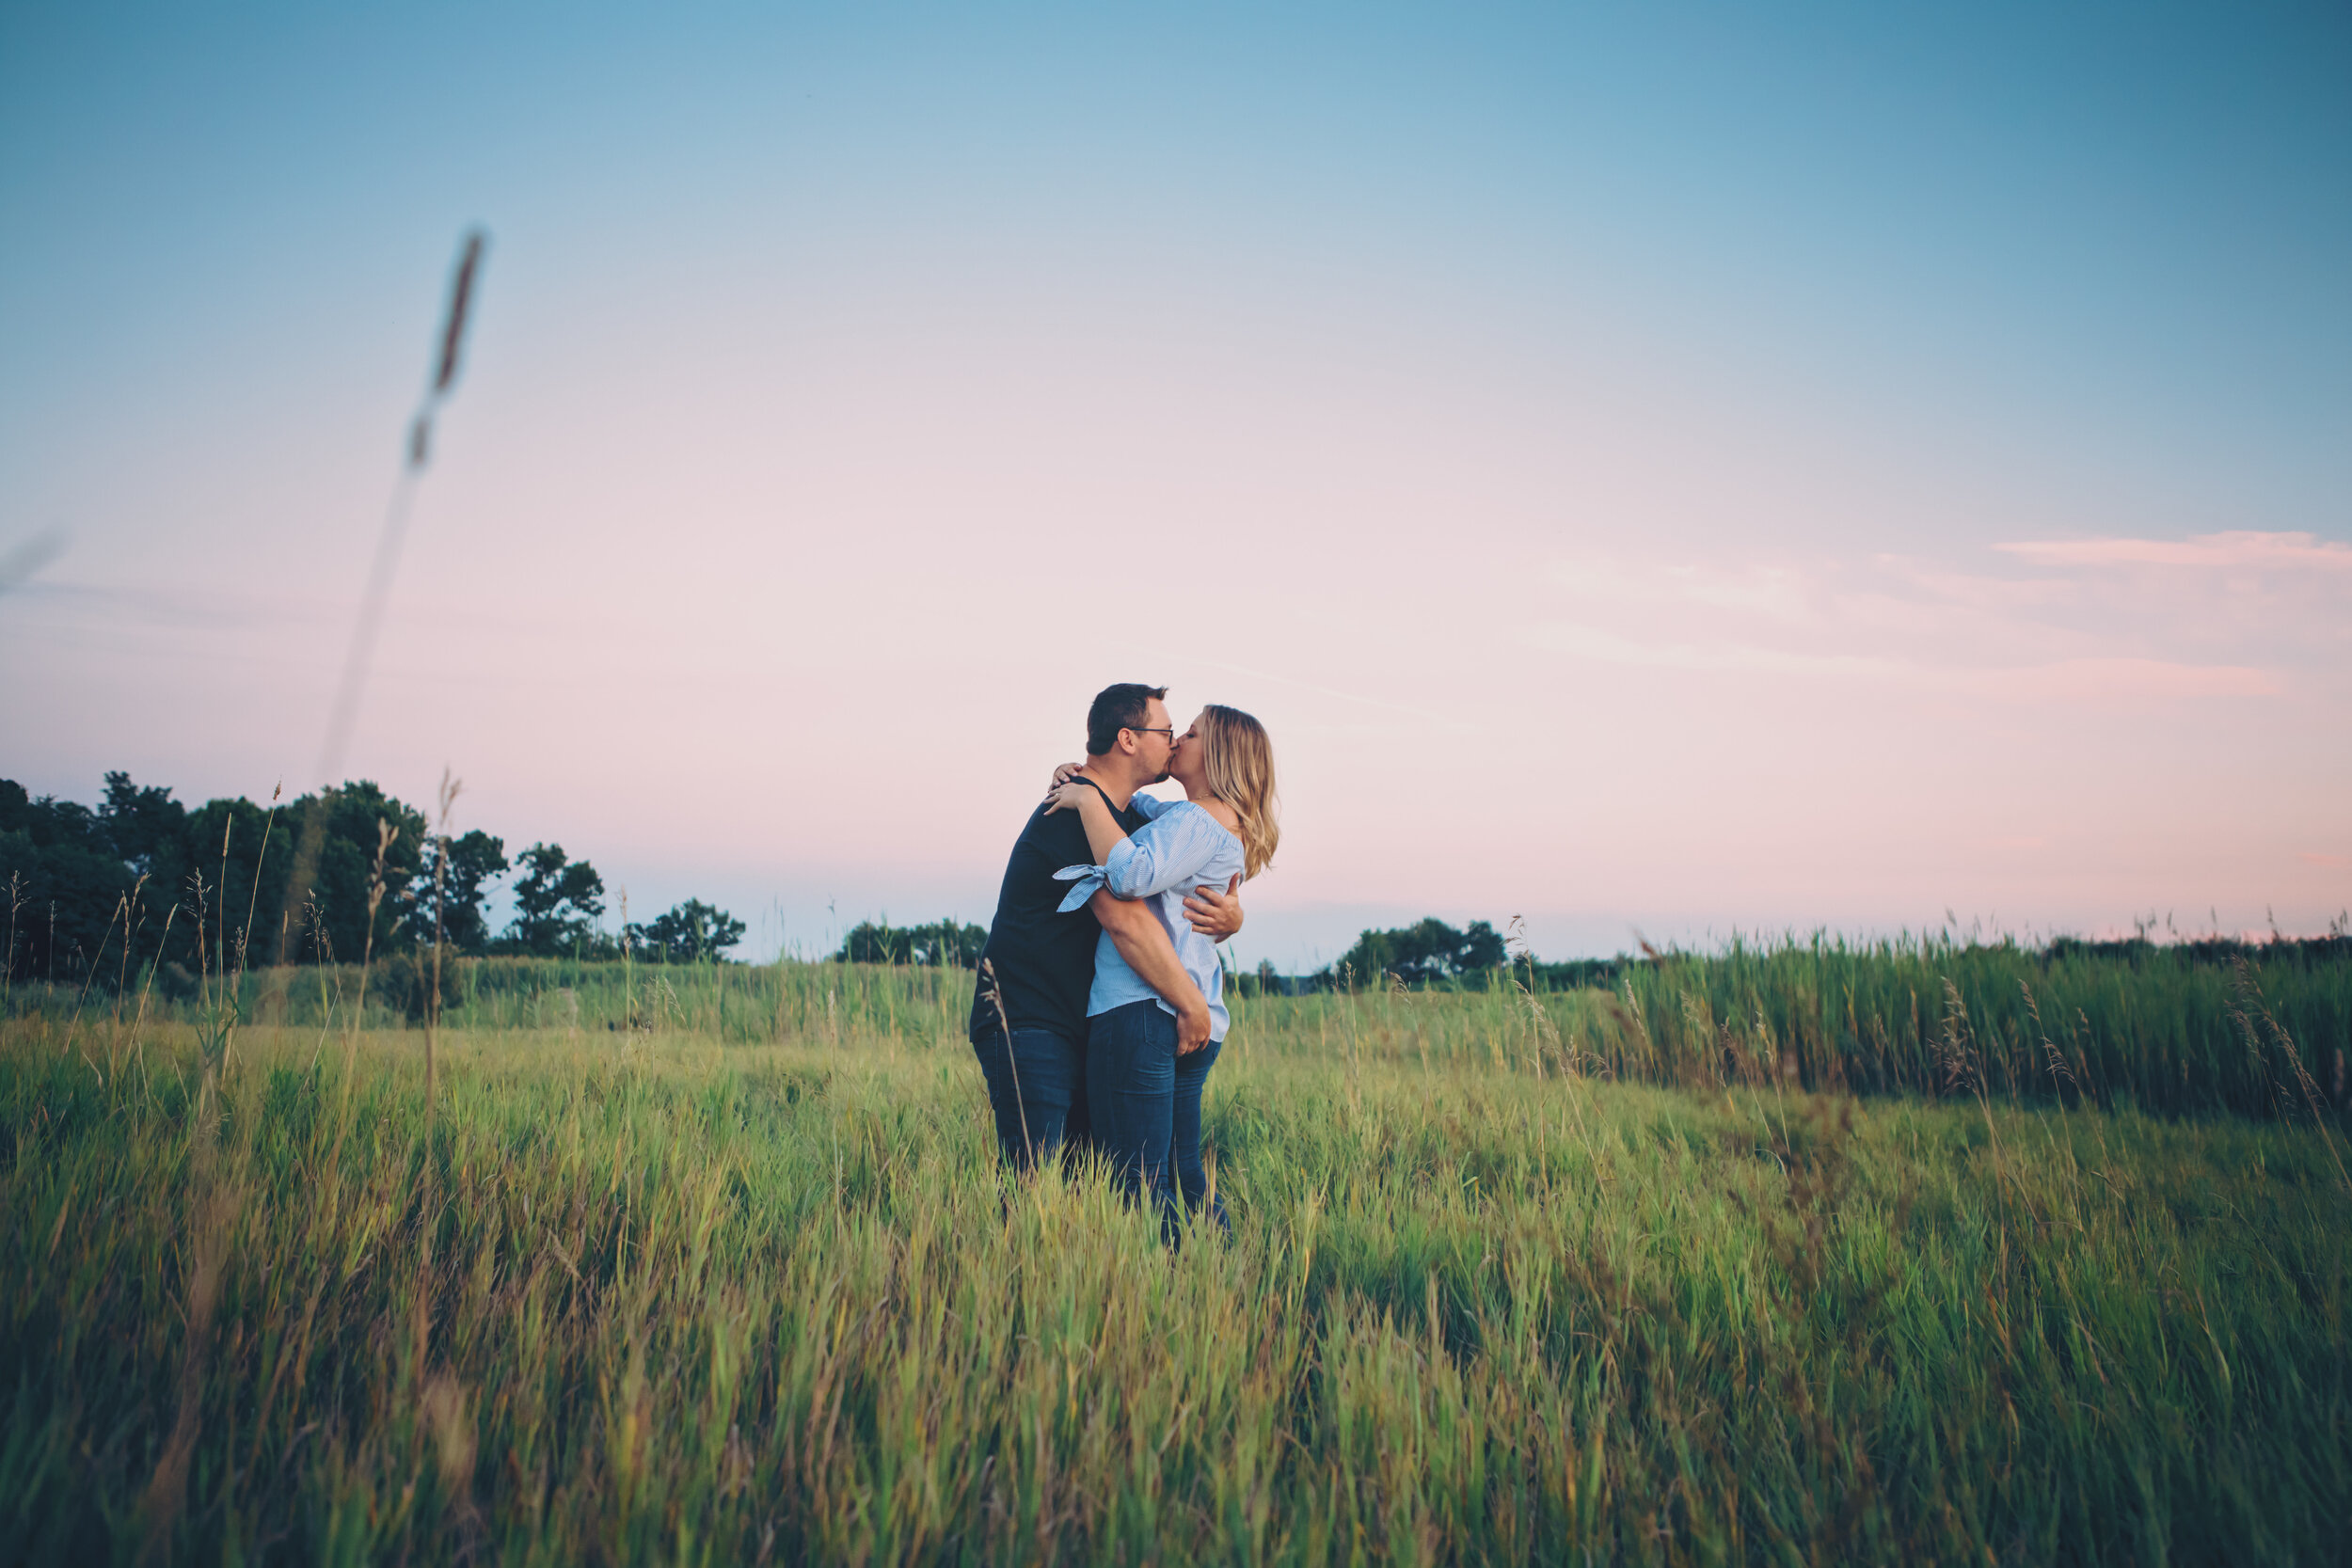  A sweet kiss shared as night enters the sky #tealawardphotography #texasengagement #amarillophotographer #amarilloengagementphotographer #emotionalphotography #engagementphotography #couplesphotography #engagement #engaged #westernphotography #texasfiance 